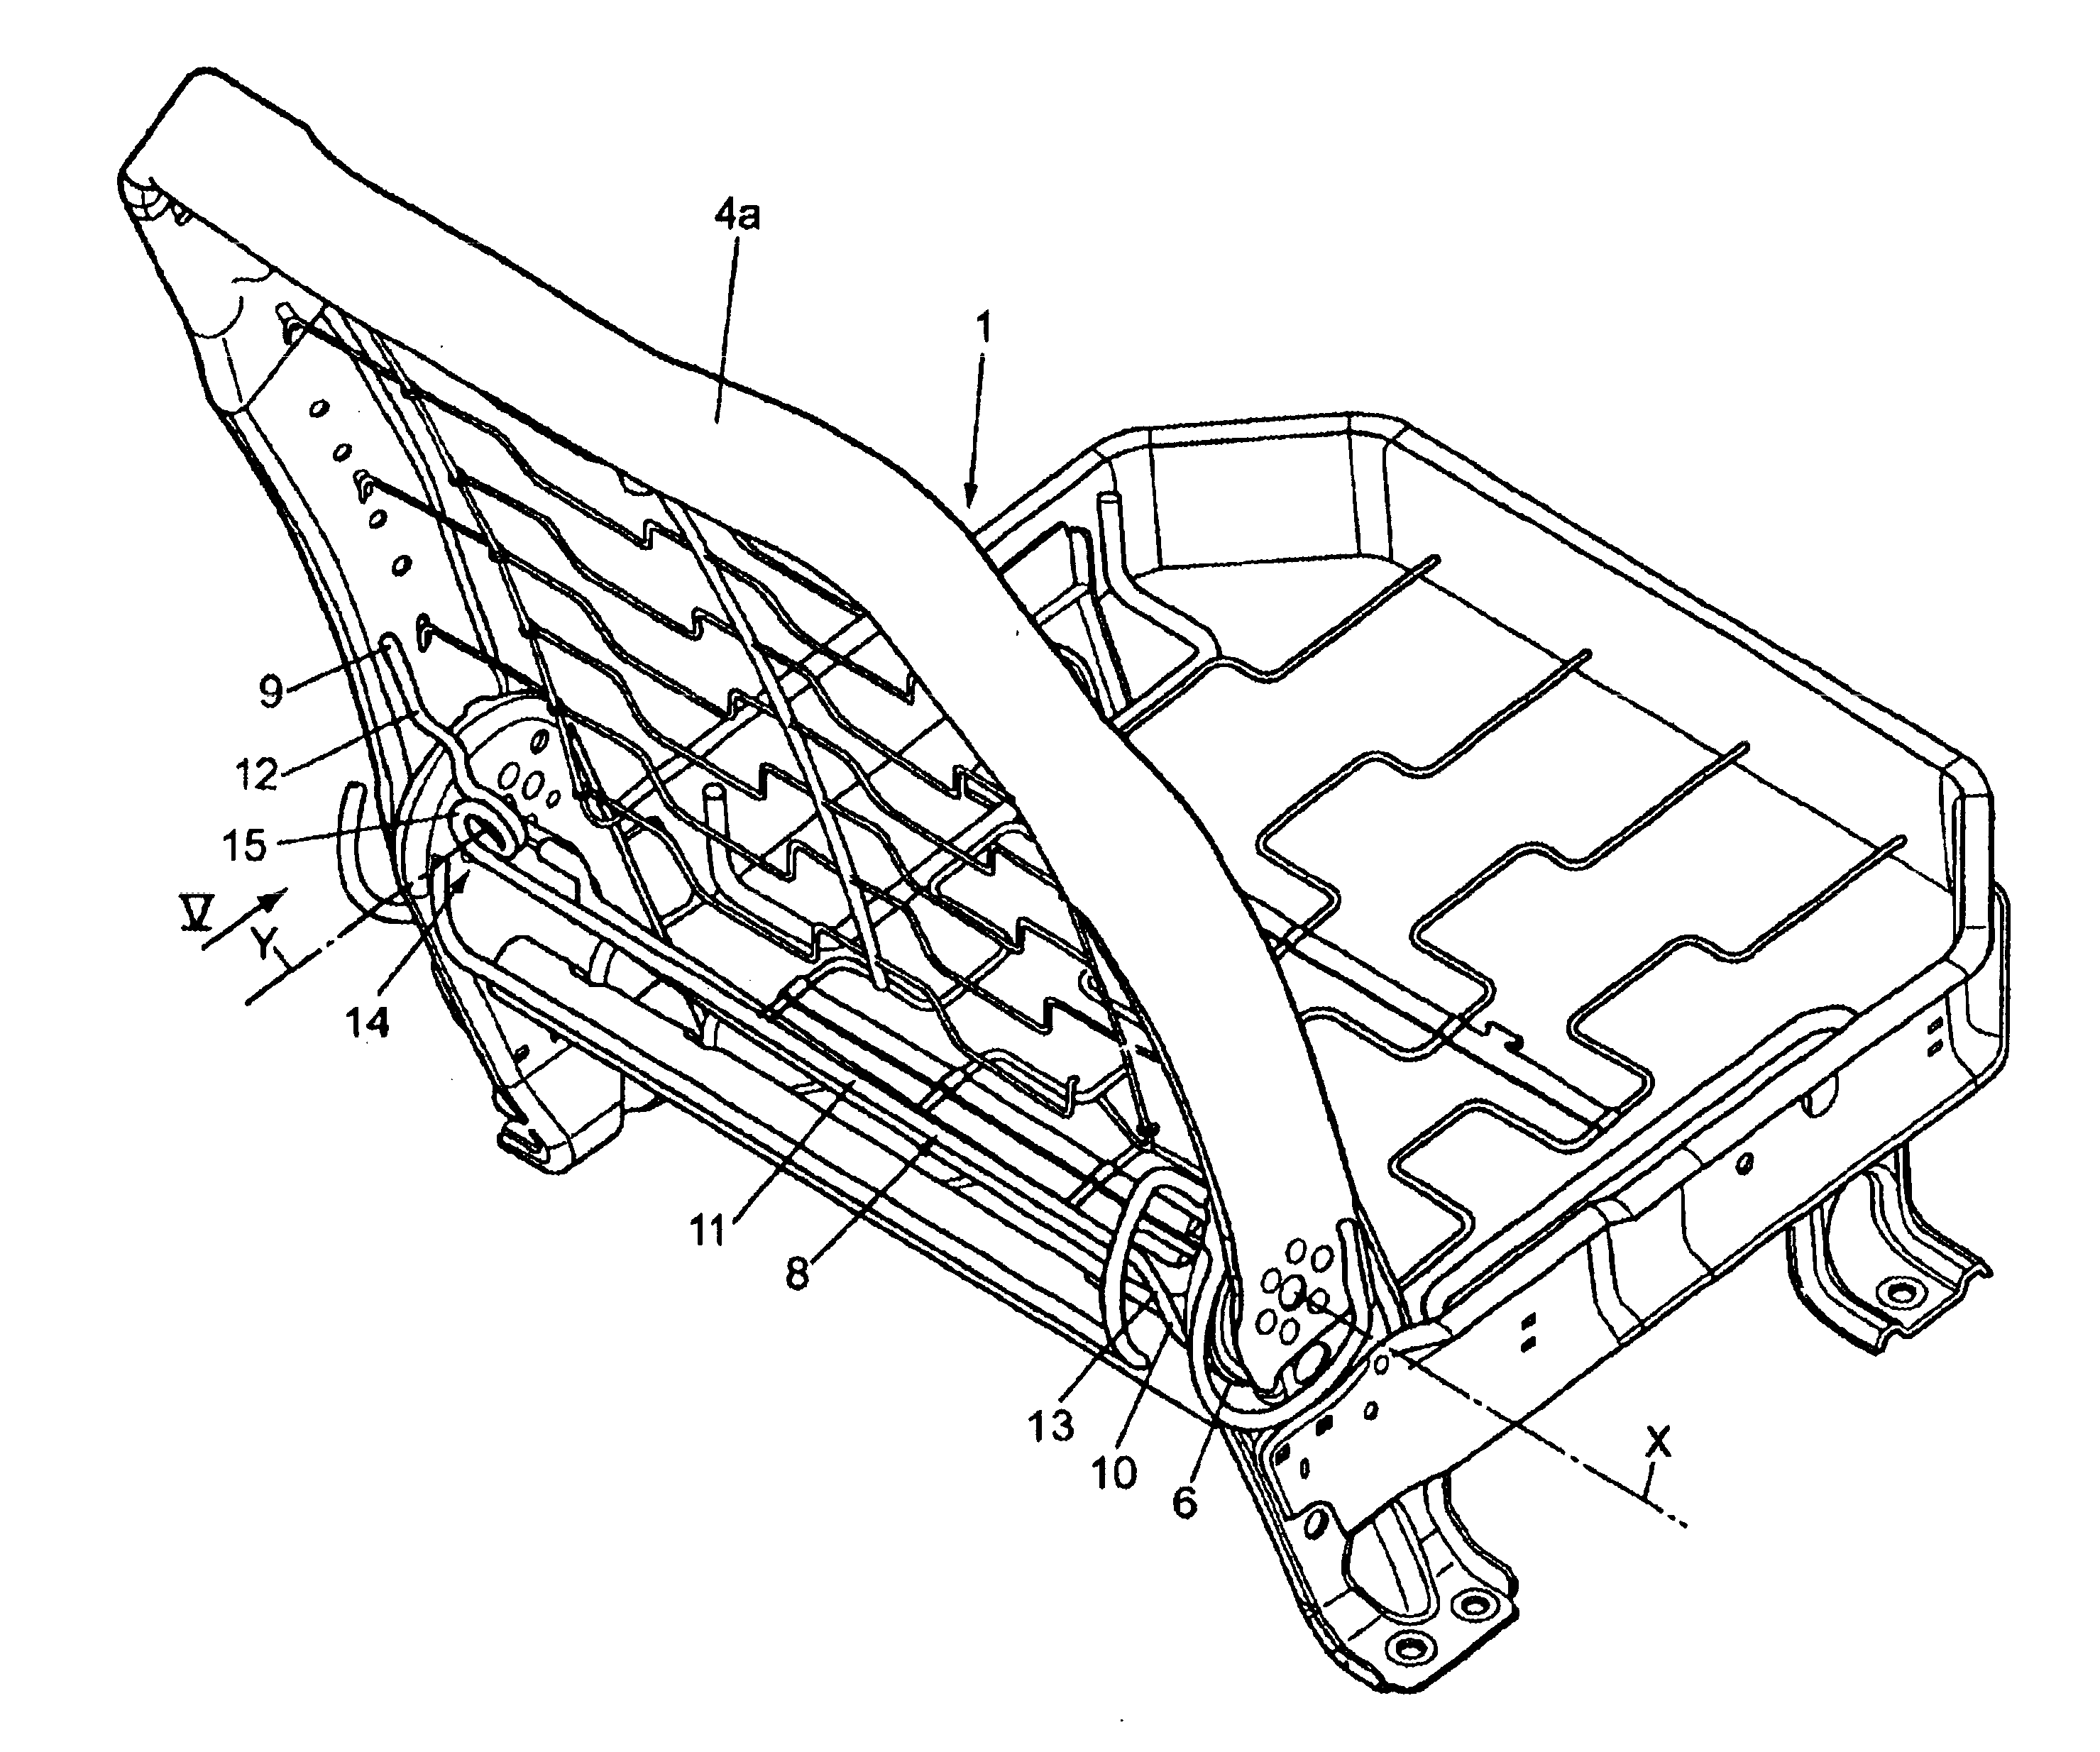 Vehicle seat including a pivoting back urged forwards by a torsion bar